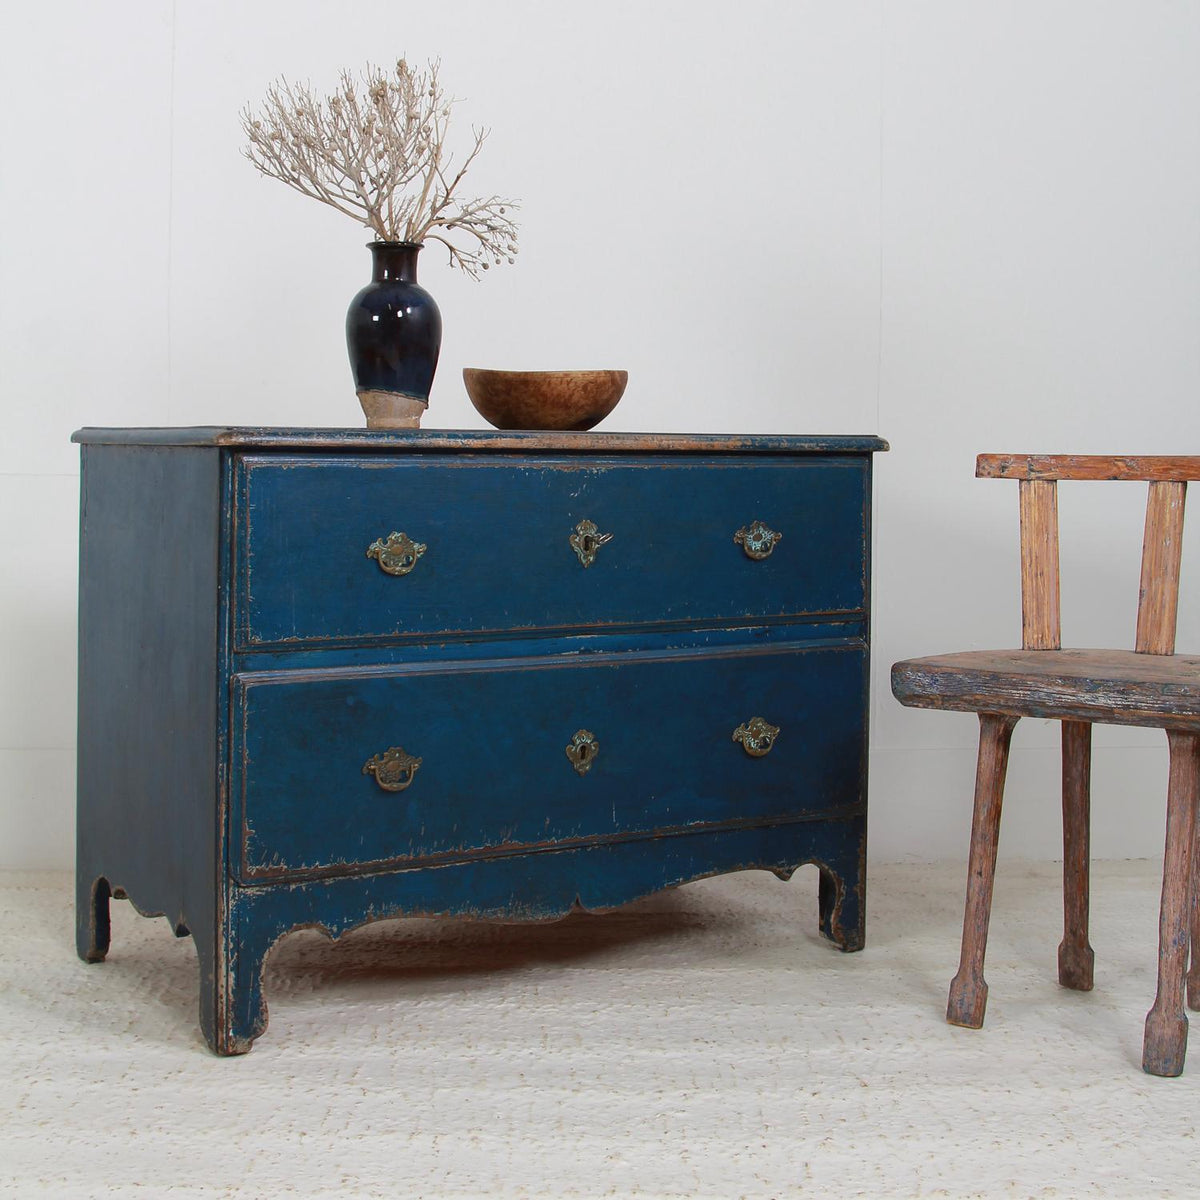 Charming Swedish 18thC Rococo Commode in Original Blue Paint